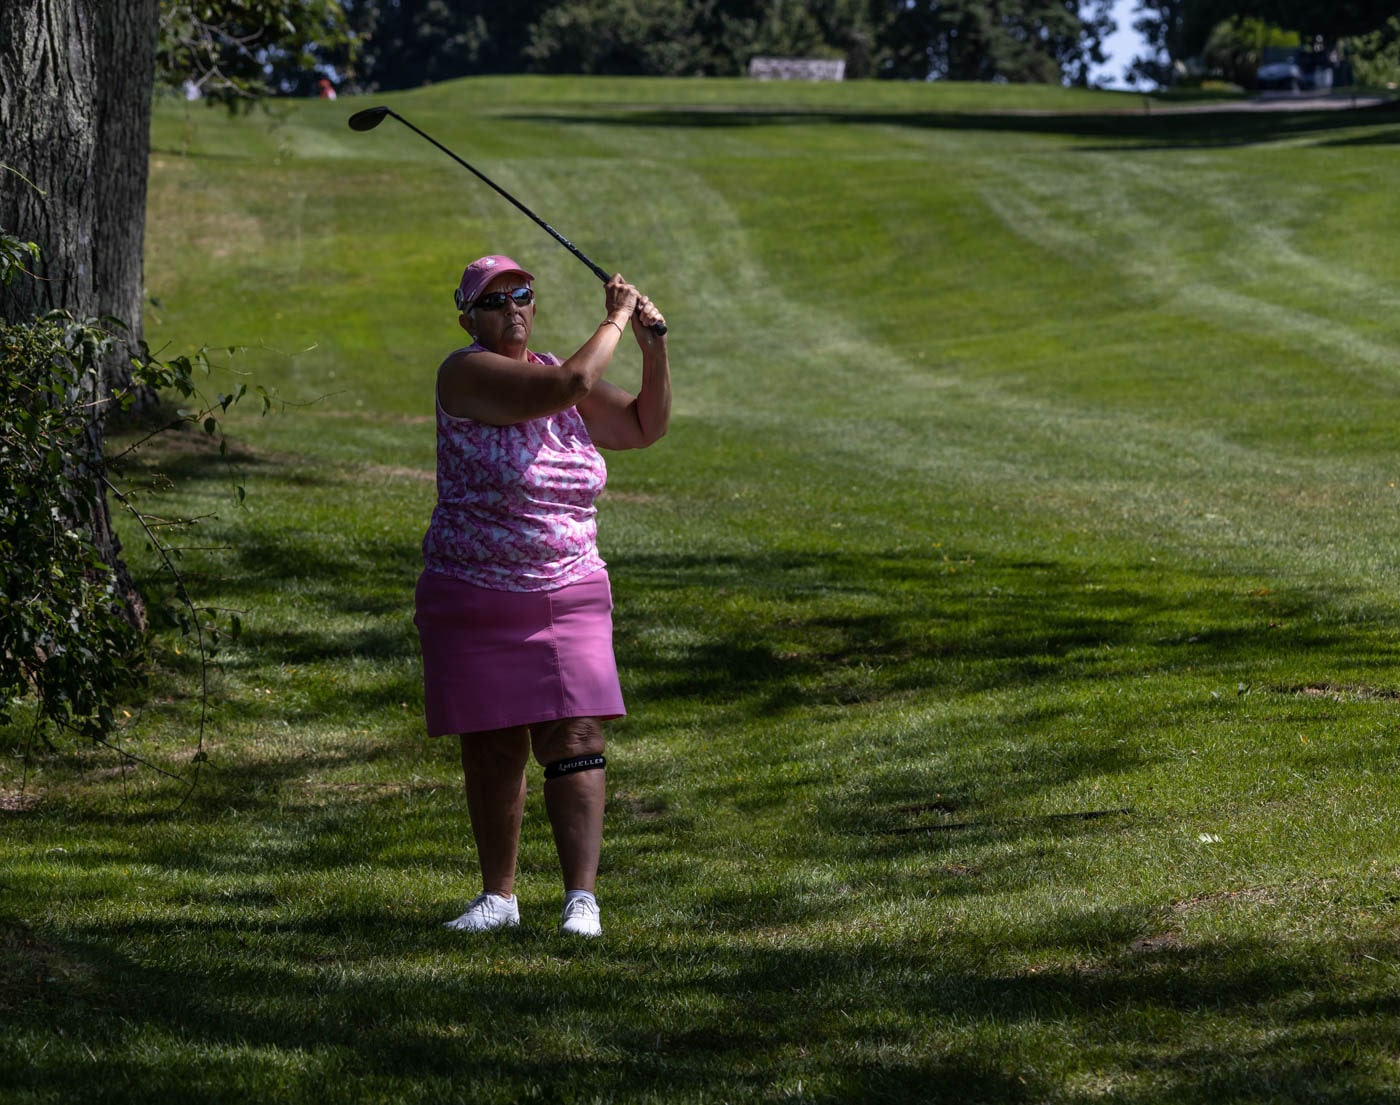 Country-Club-Of-New-Bedford FB-2023-Womens-FB-Gallery August-2023-Country-Club-Of-New-Bedford-FB-2023-Womens-FB-Gallery August-2023-Womens-FB-Gallery-Tuesday-Photos-Image-24